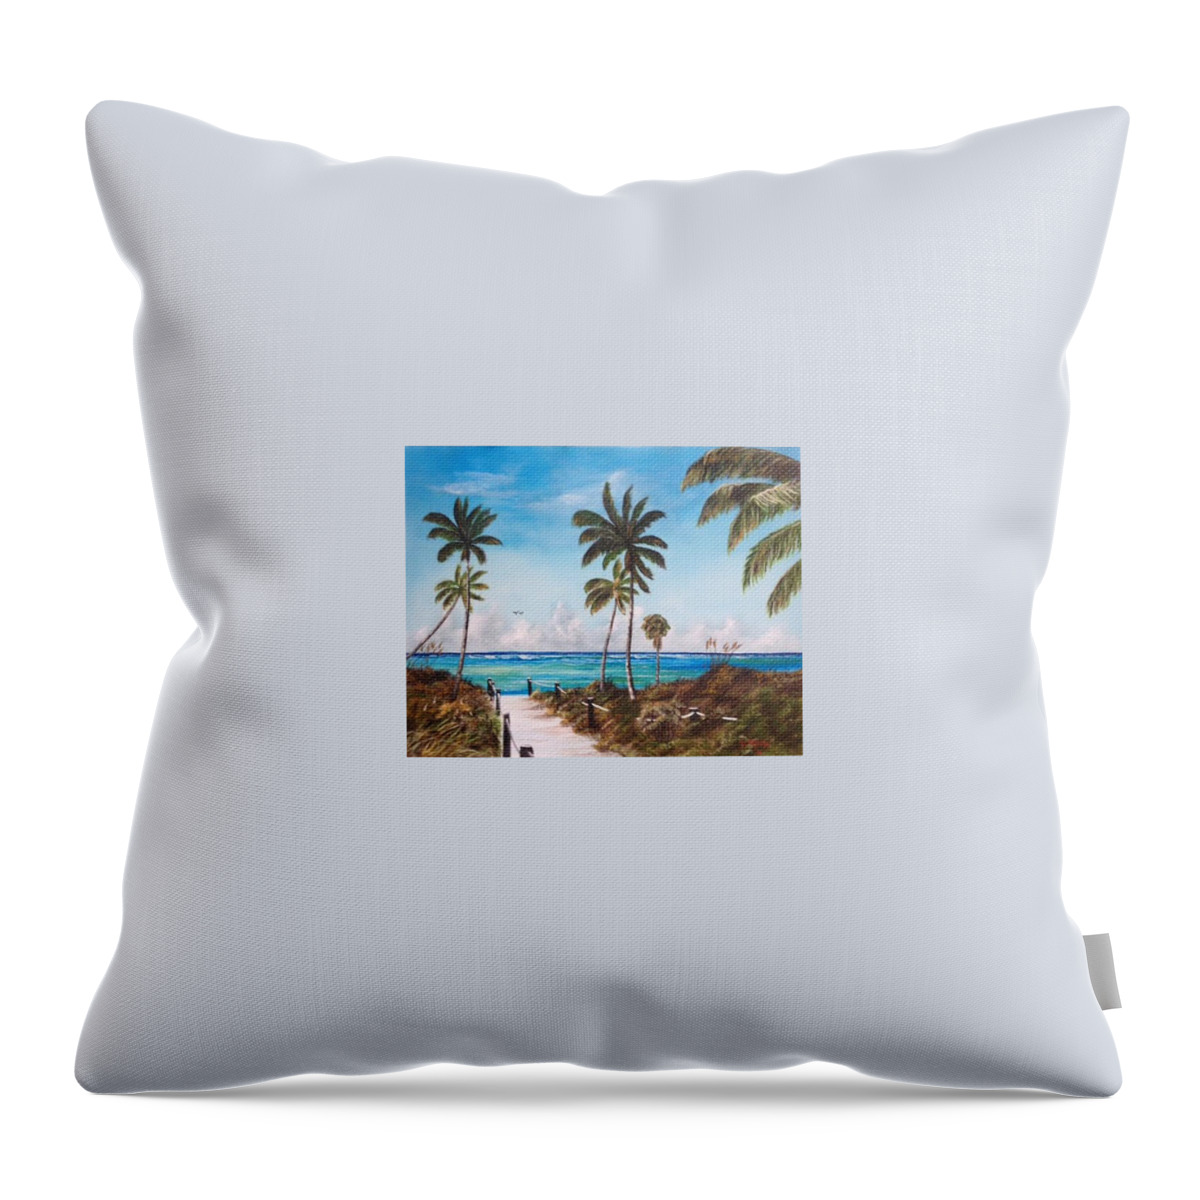 Siesta Key Throw Pillow featuring the painting This Way To Siesta Key Beach by Lloyd Dobson